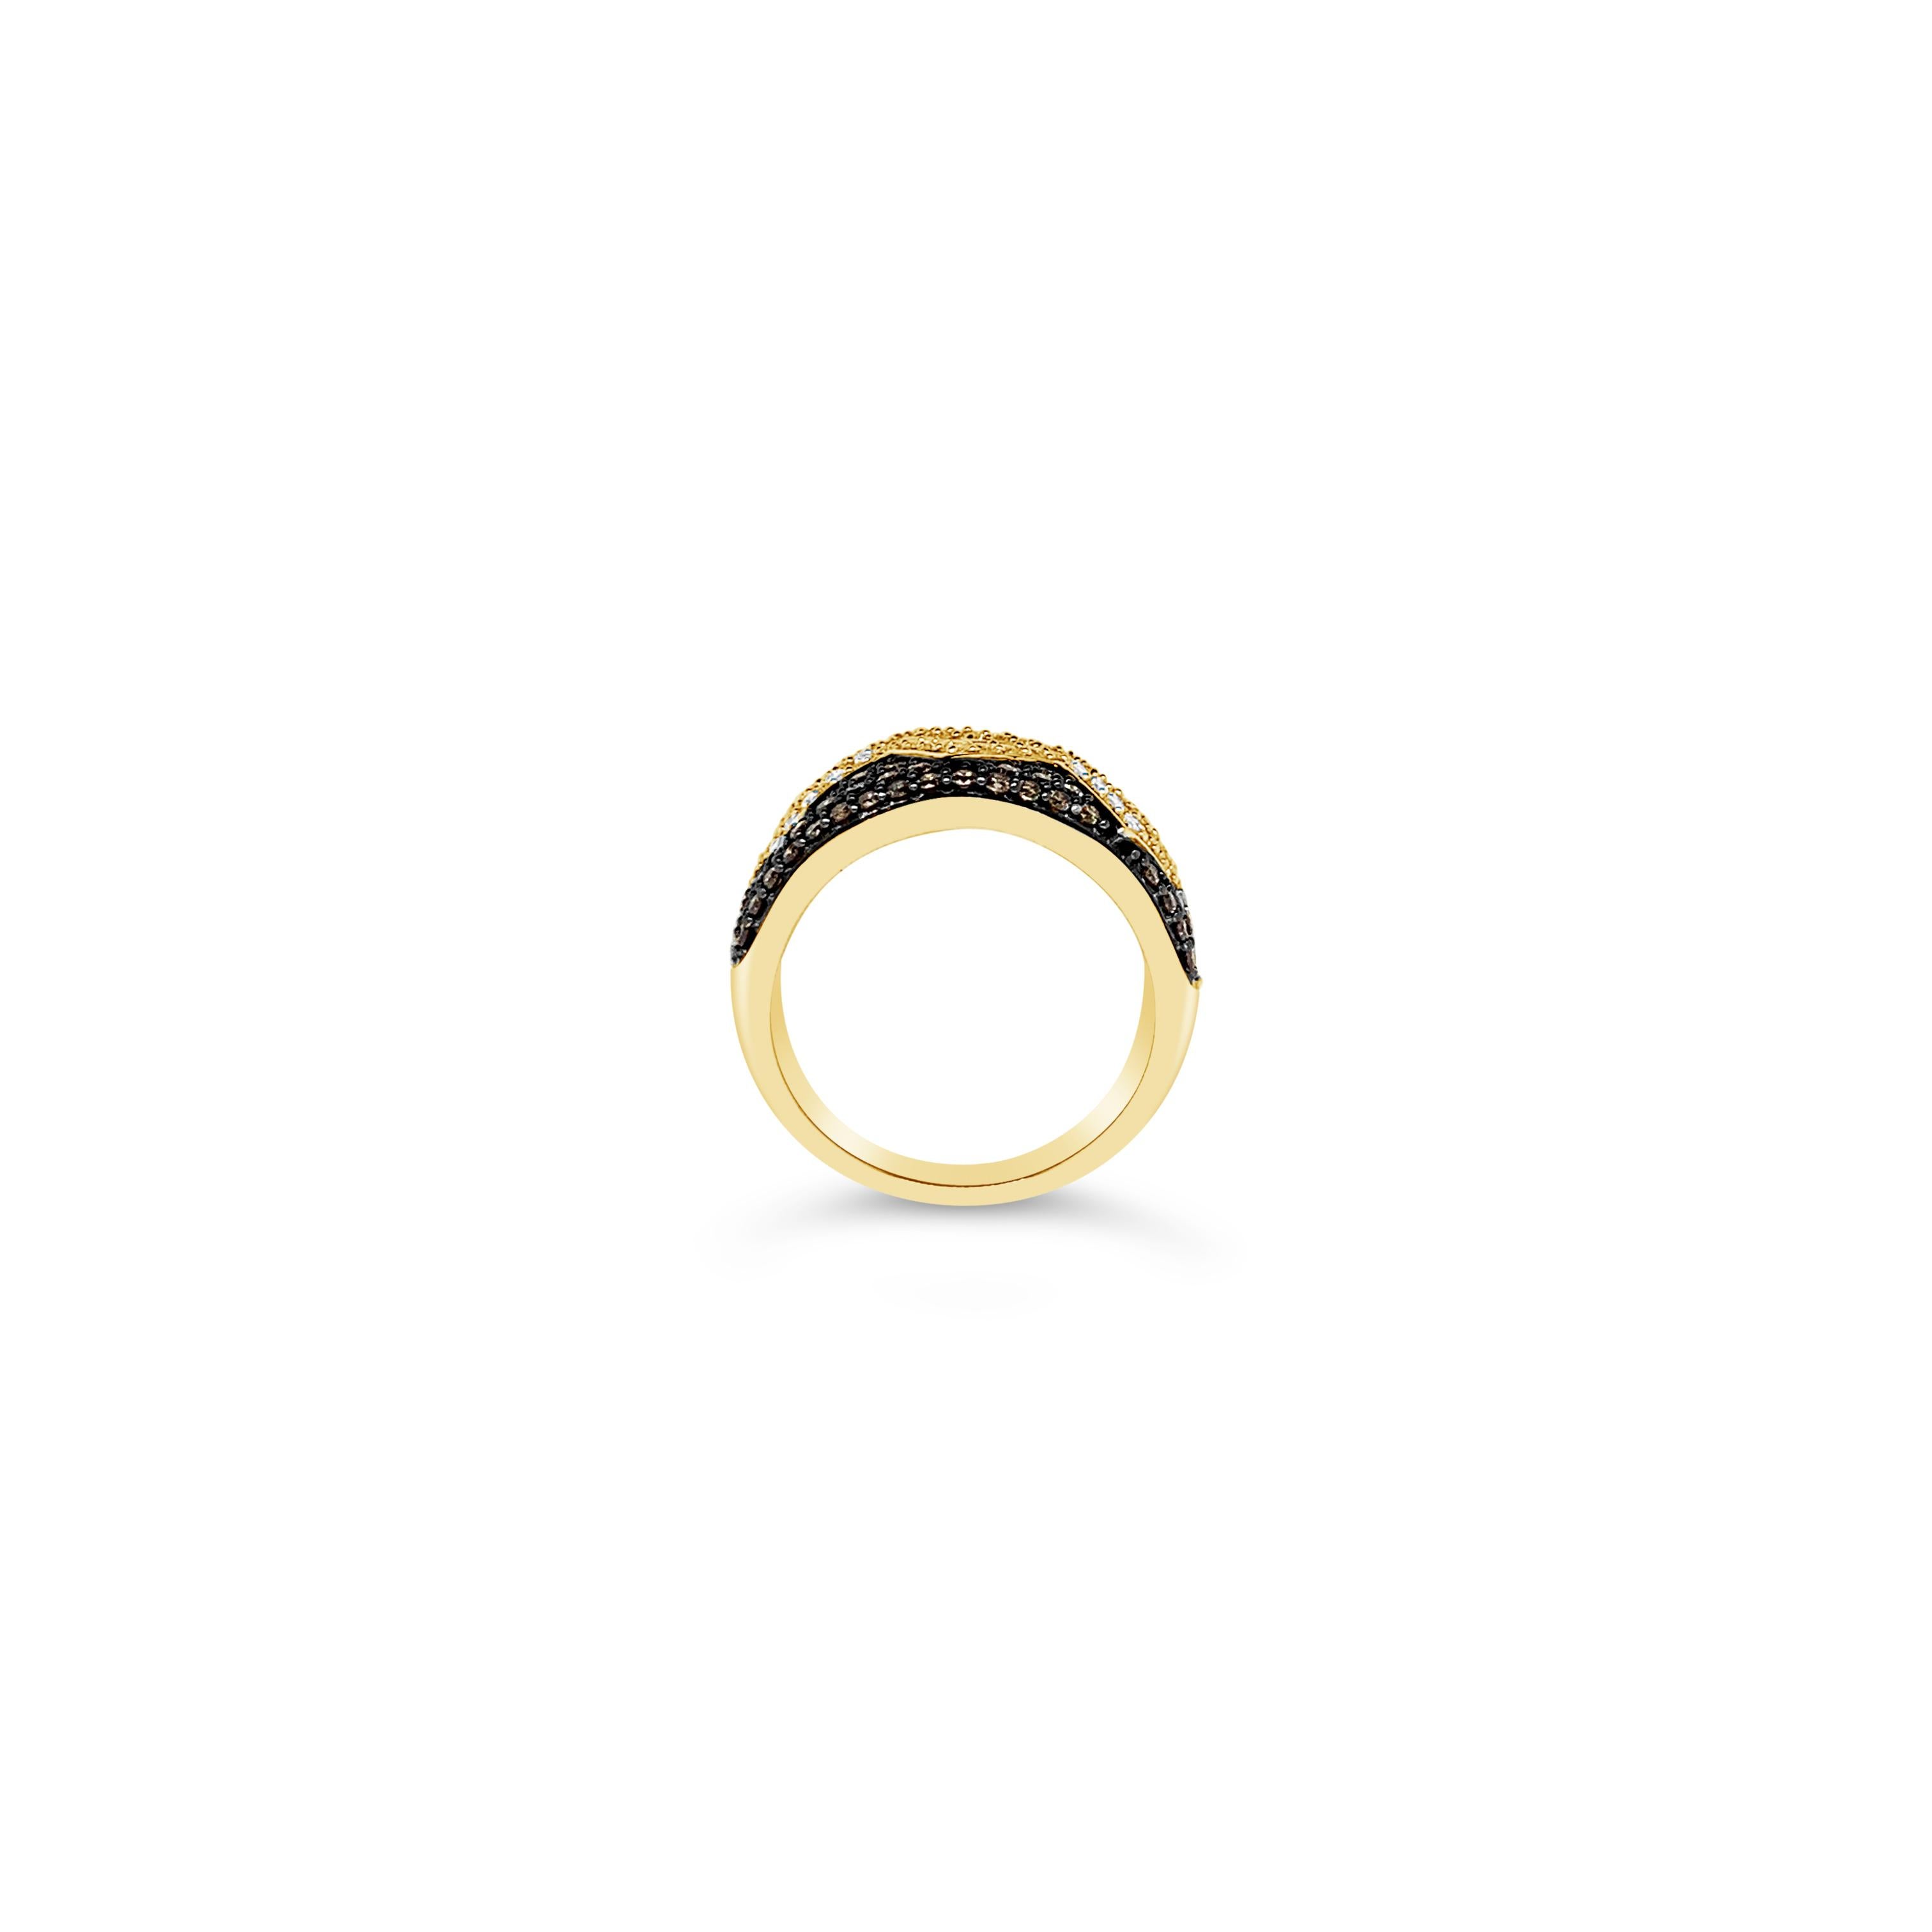 Le Vian Chocolatier® Ring featuring .65 cts. Chocolate Diamonds®, .35 cts. Vanilla Diamonds® set in 14K Honey Gold™

Diamonds Breakdown:
.65 cts Brown Diamonds
.35 cts White Diamonds

Gems Breakdown:
None

Ring may or may not be sizable, please feel